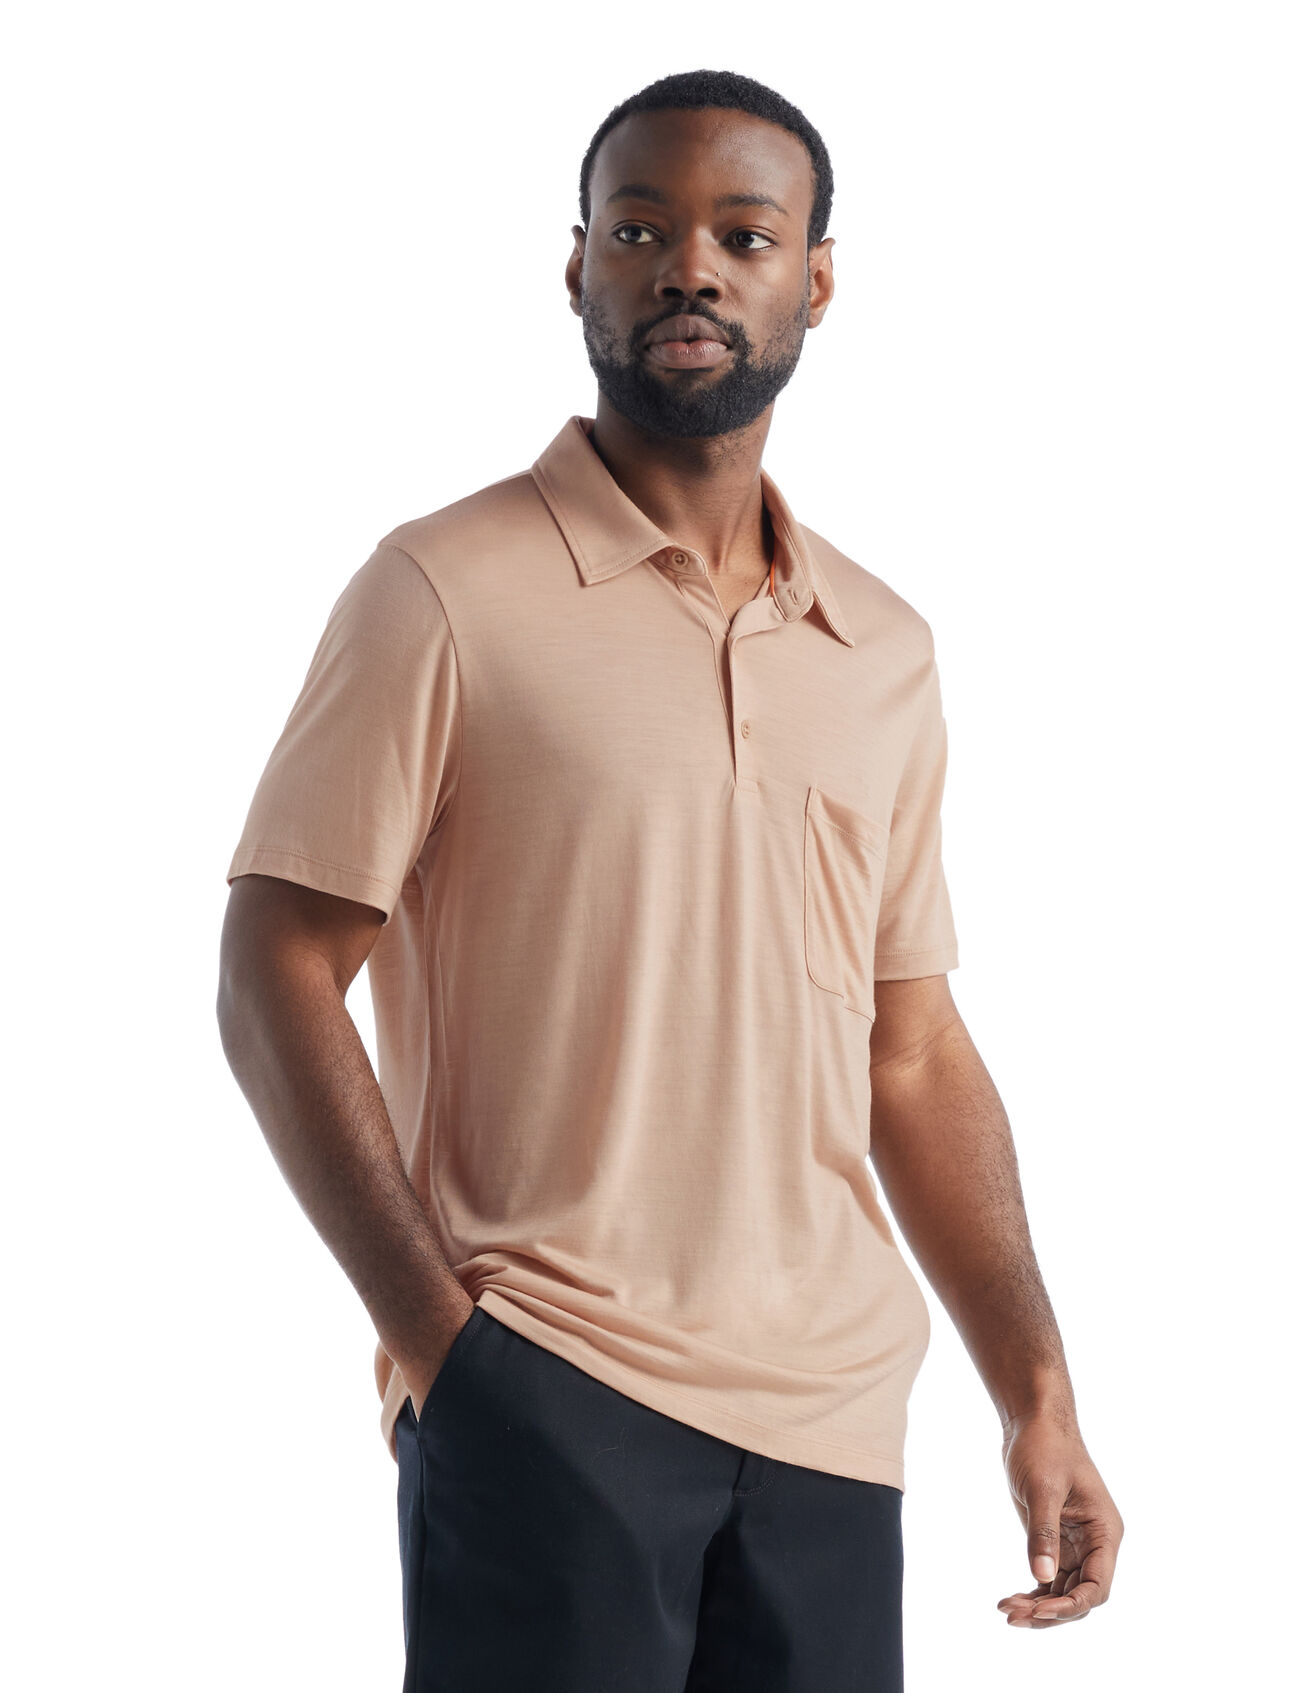 Mens Merino Drayden Short Sleeve Polo A classic, stylish polo with everyday versatility and incredible breathability, the Drayden Short Sleeve Polo features our moisture-wicking Cool-Lite™merino jersey fabric.